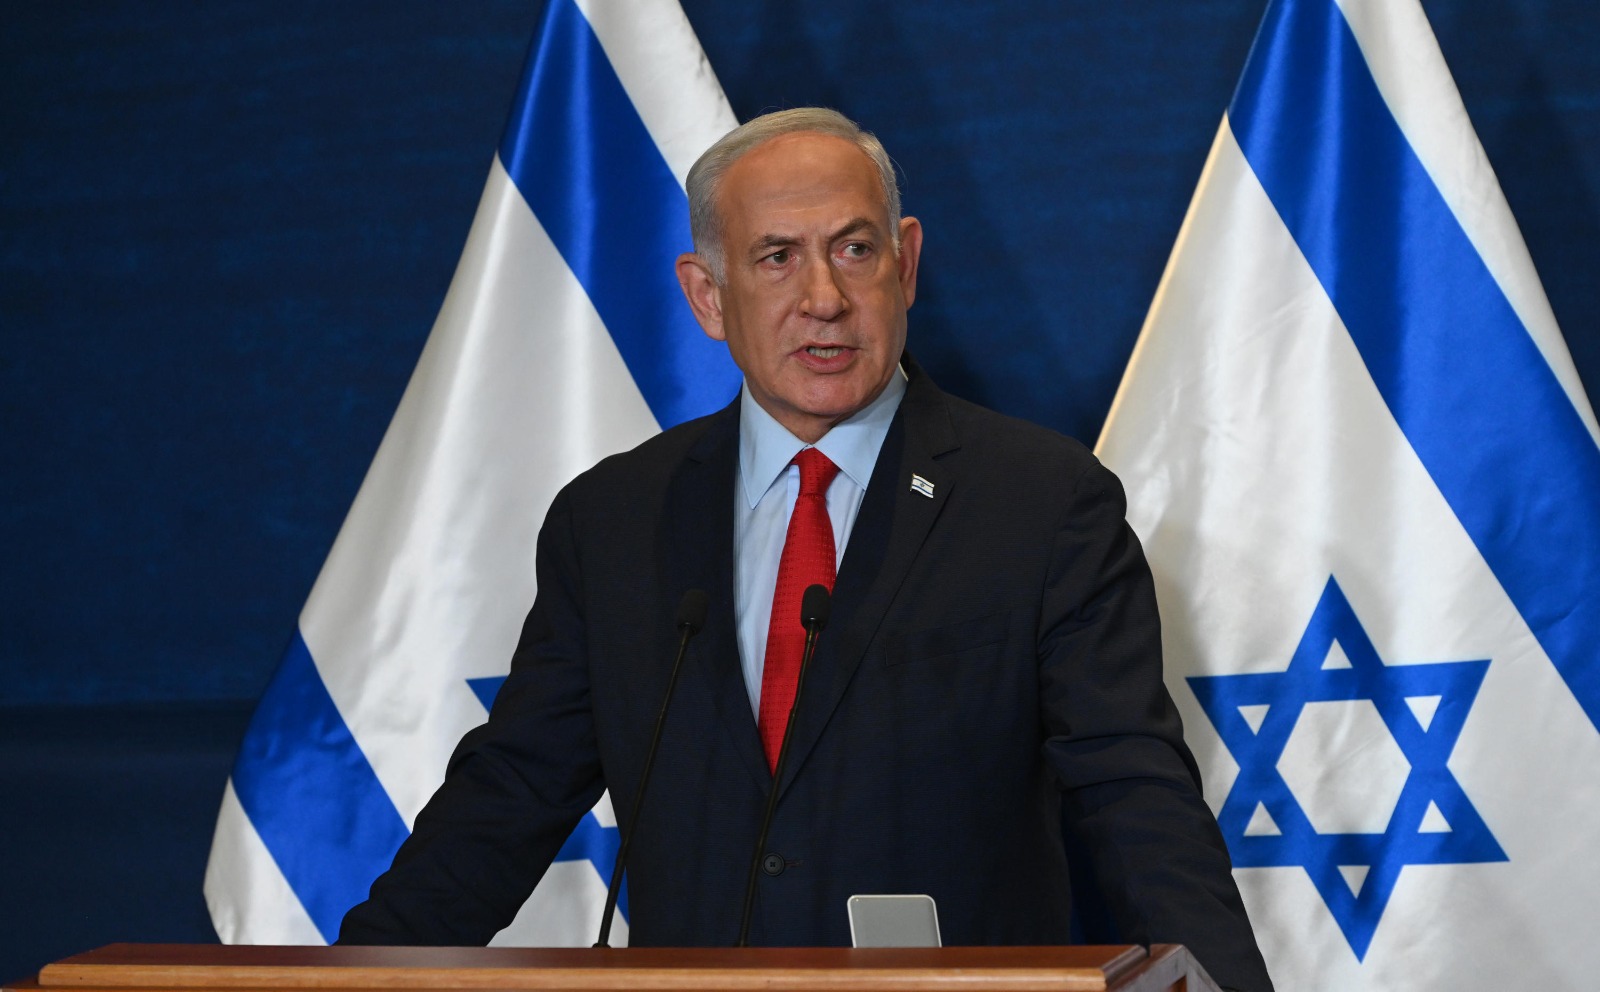 Netanyahu slams 'hypocrisy' as South Africa files genocide case against Israel